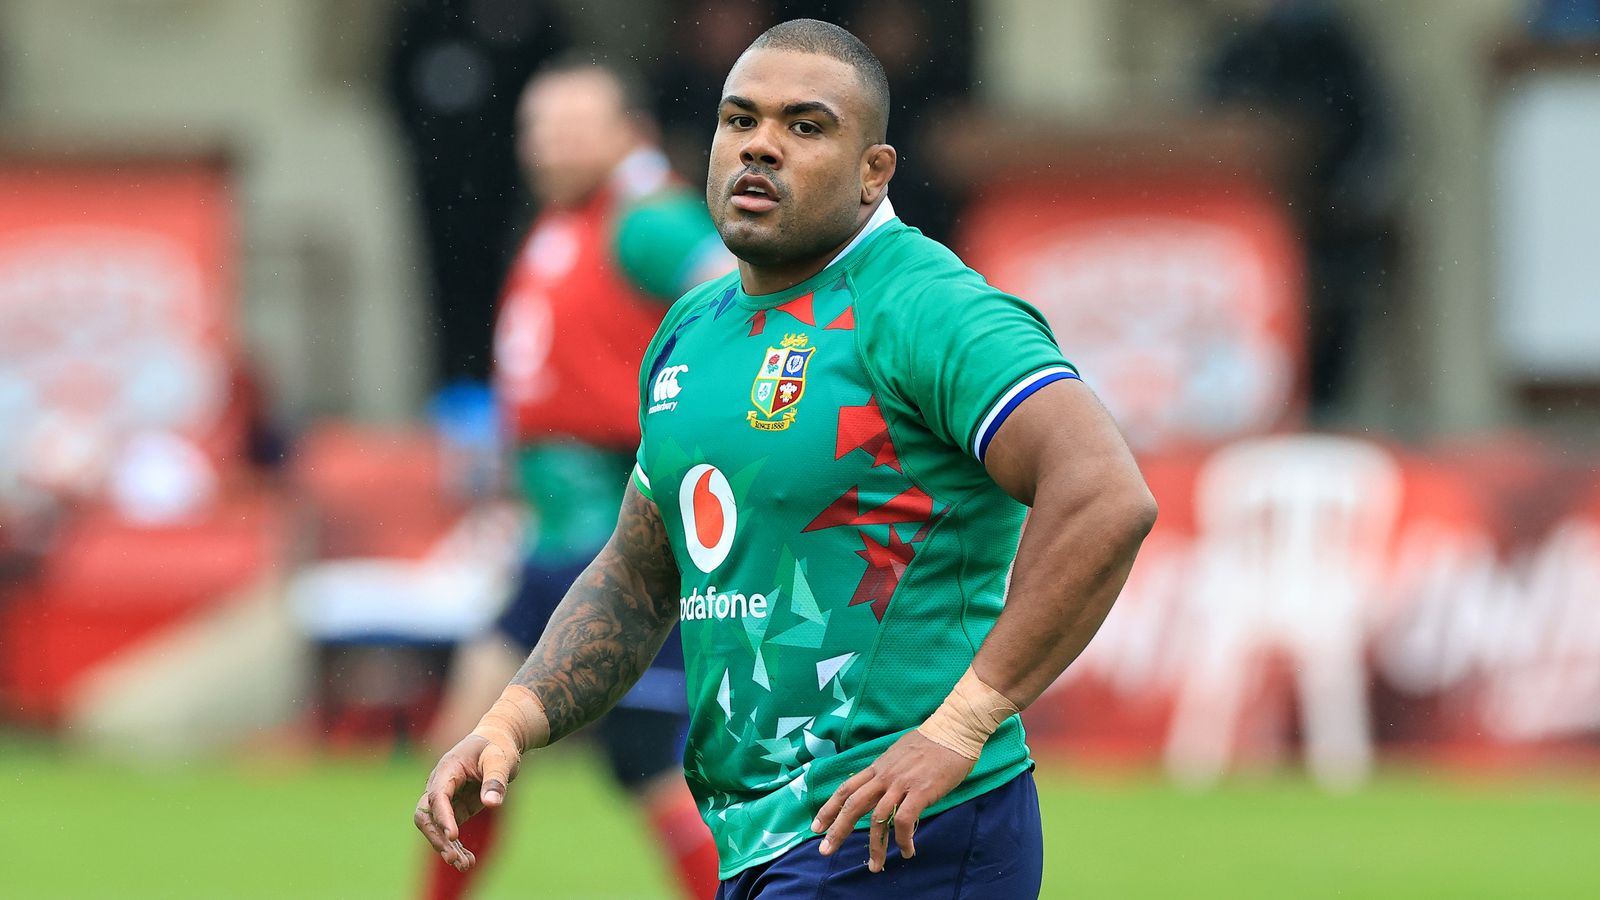 Kyle Sinckler on raw emotions, British and Irish Lions experience and his 2019 difficulties